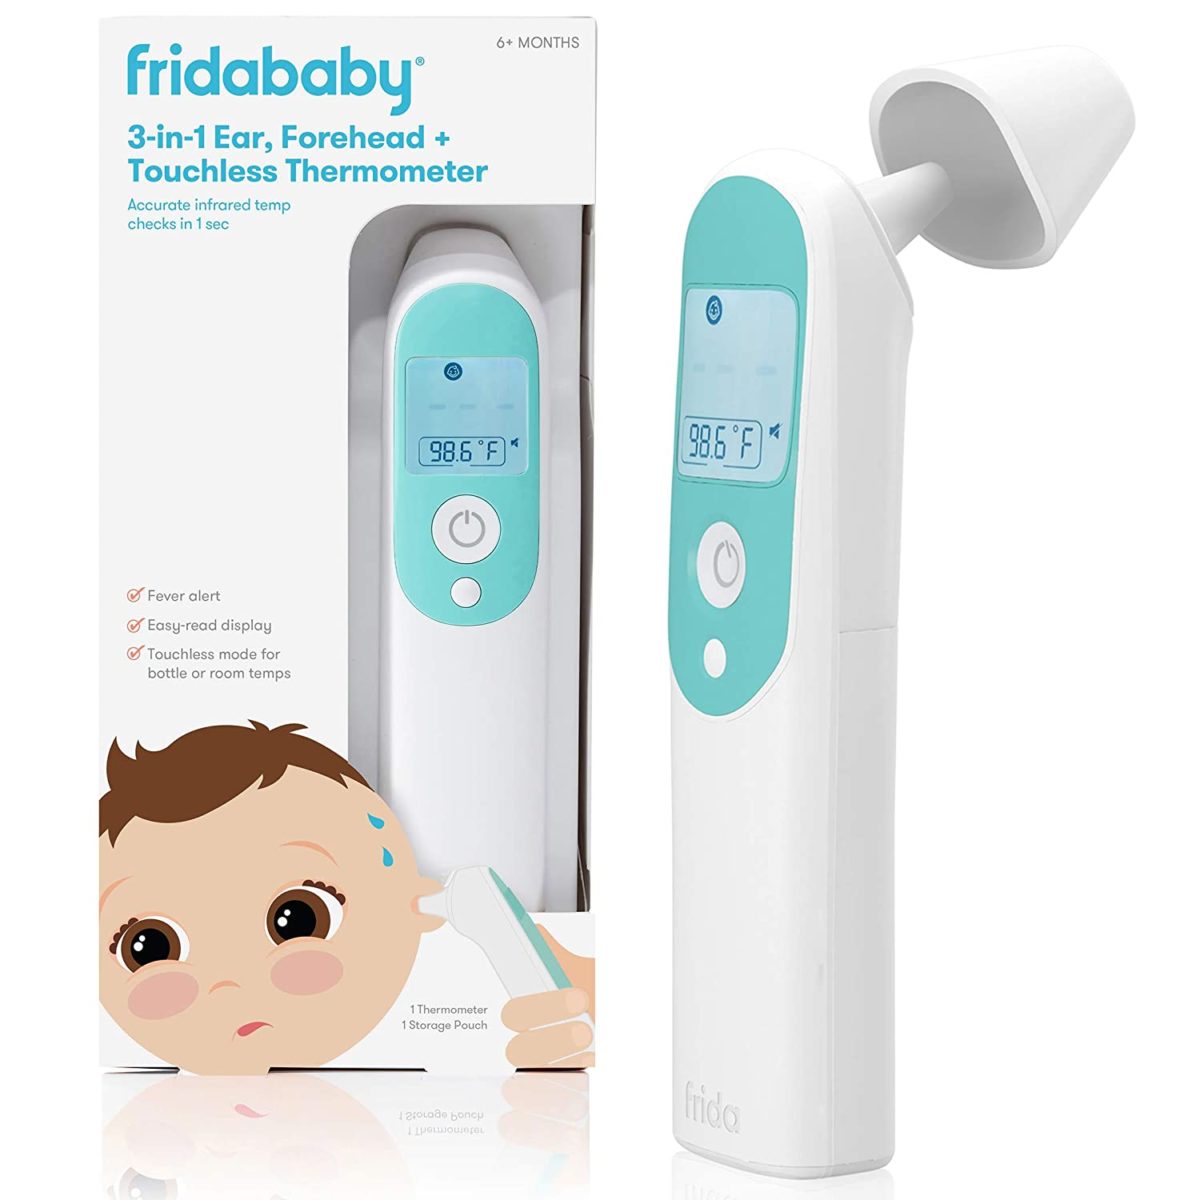 43 of the best products for moms and babies that will help you feel prepared